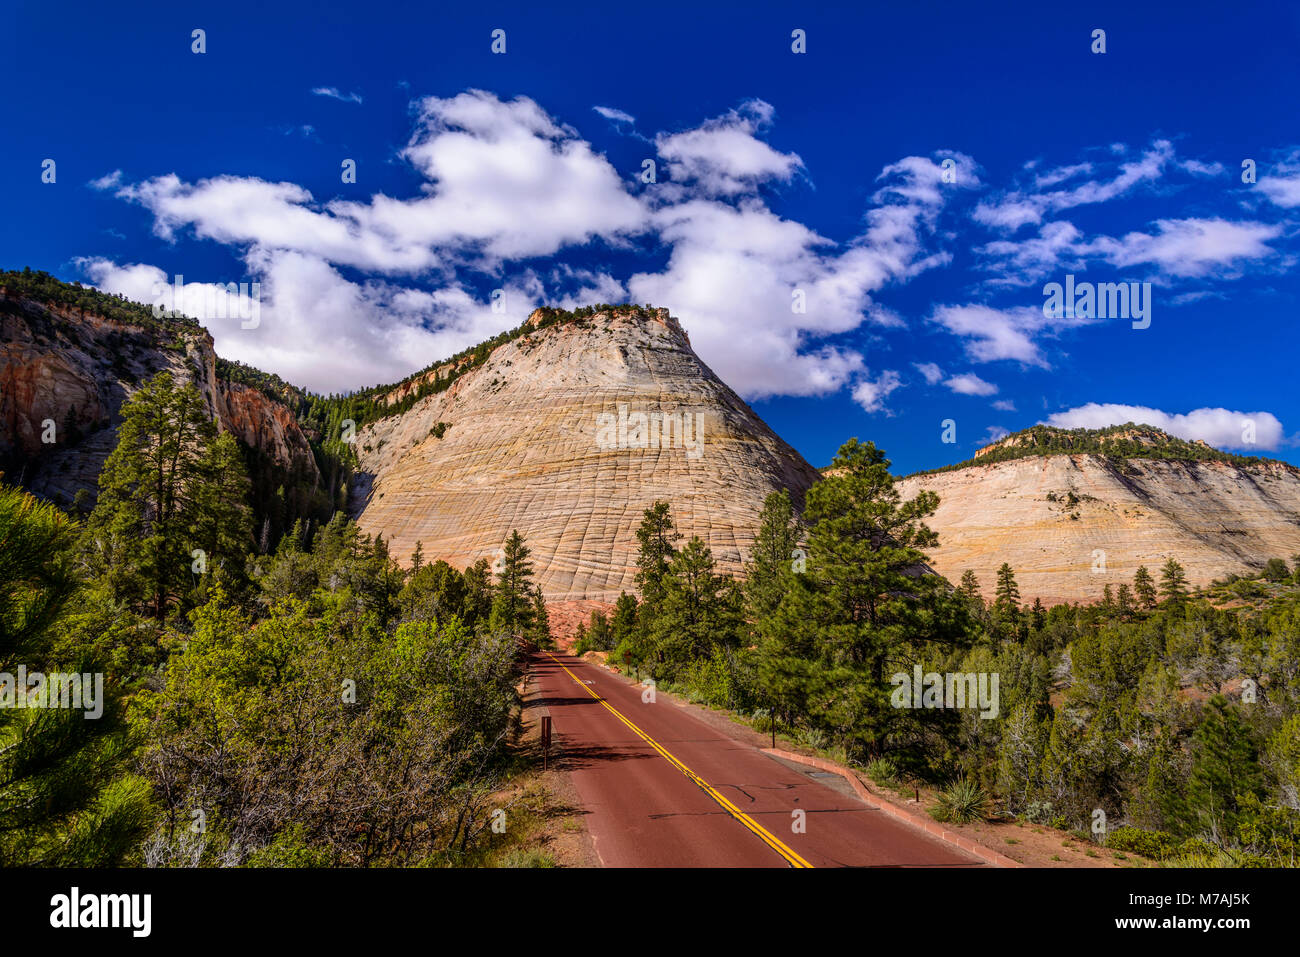 The USA, Utah, Washington county, Springdale, Zion National Park, part of town, Zion - Mount Carmel Highway, Checkerboard Mesa Stock Photo